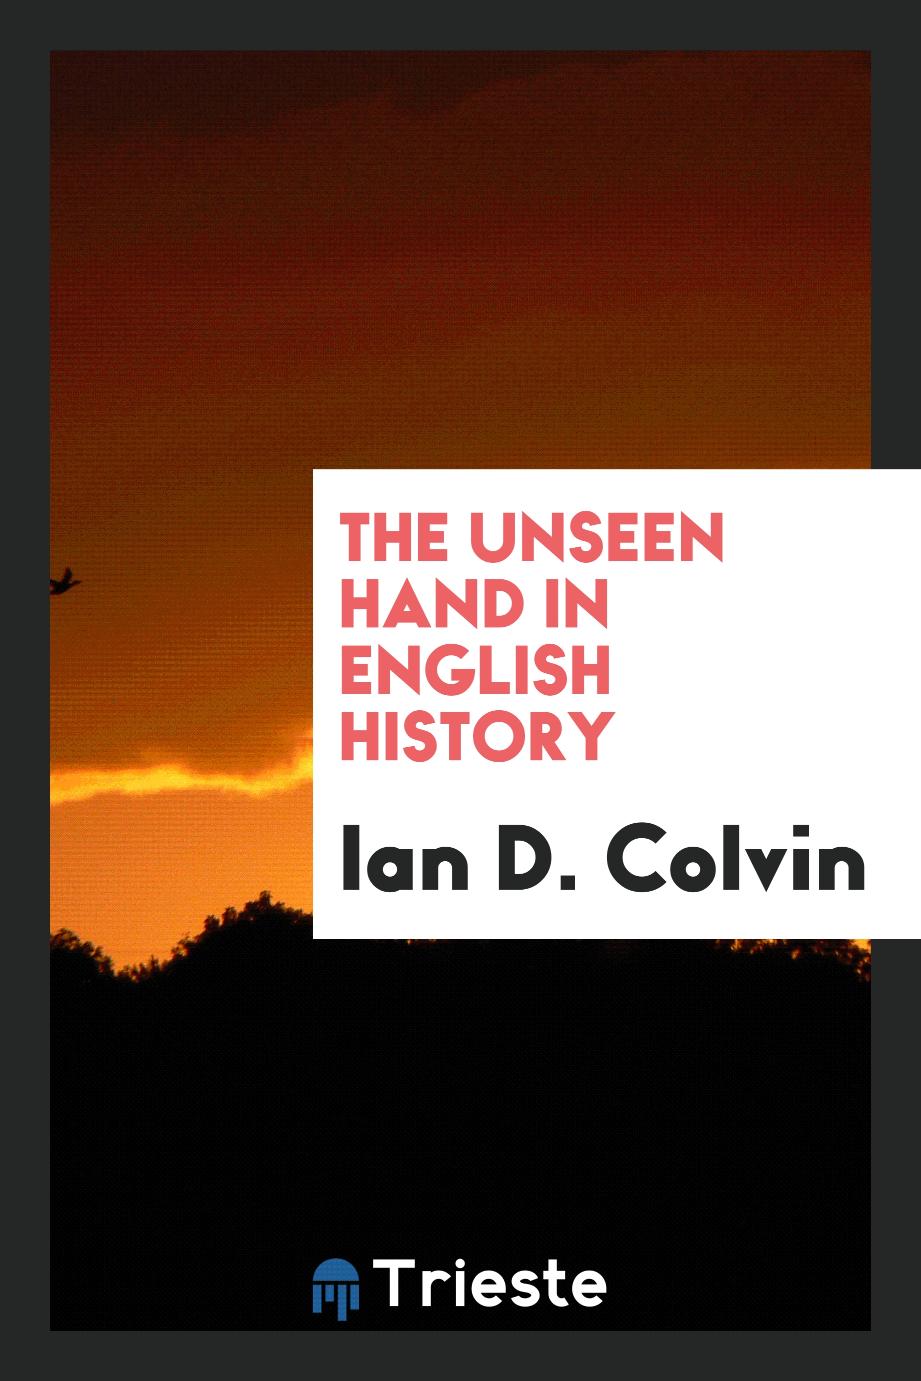 The unseen hand in English history